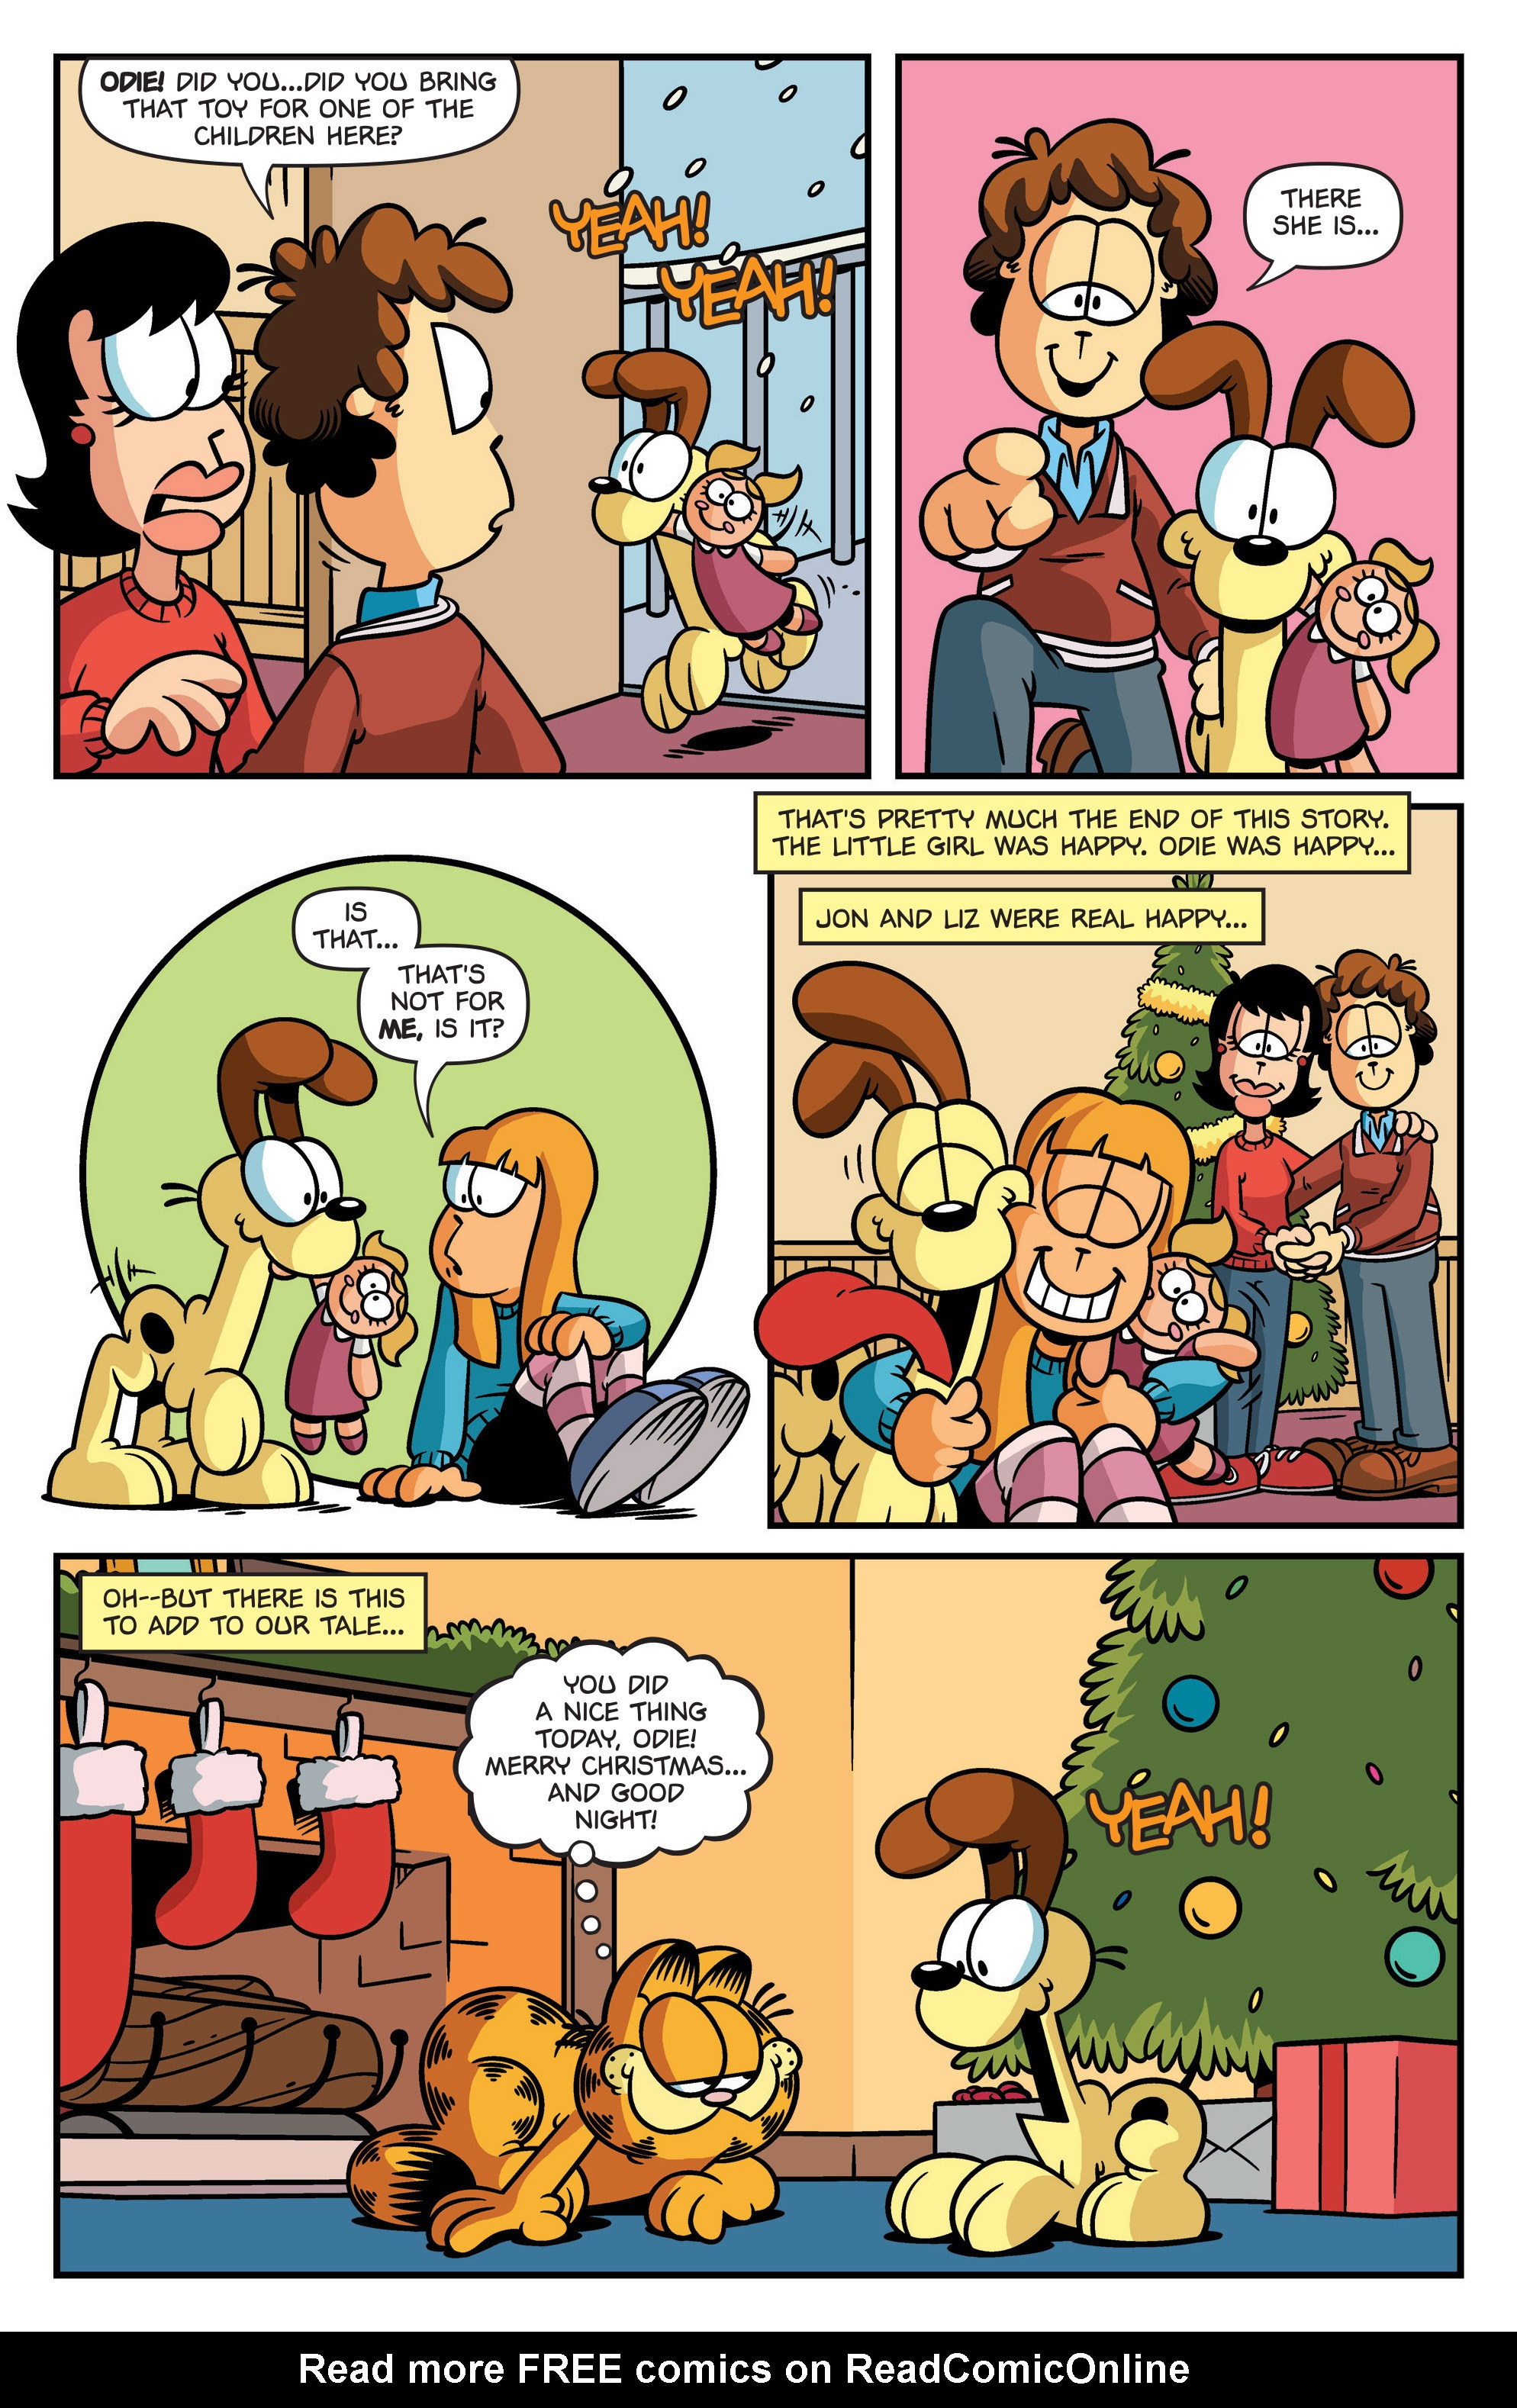 Garfield Issue 32 | Read Garfield Issue 32 comic online in high quality